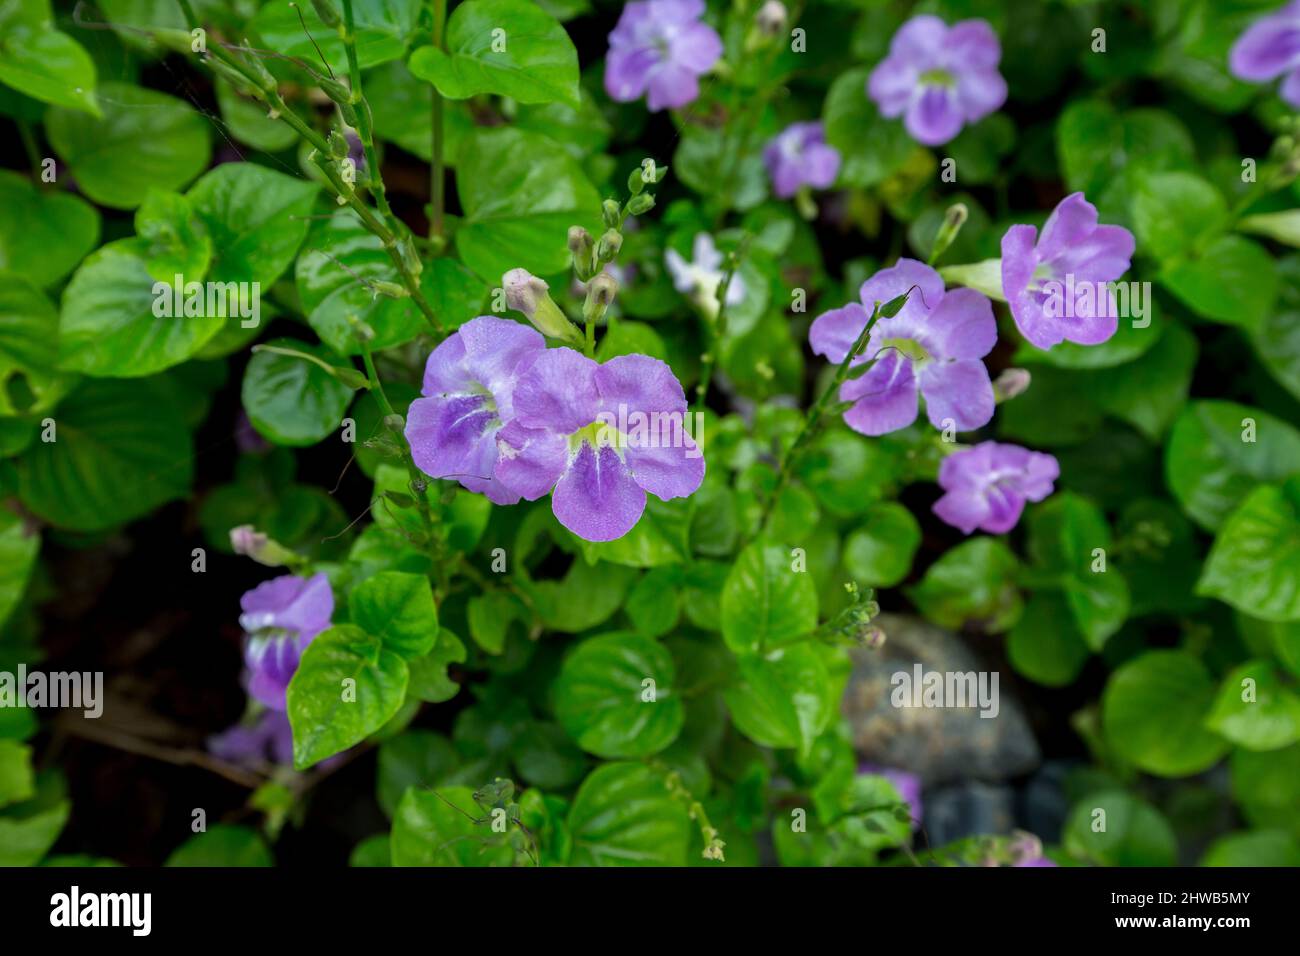 Bengal clock vine plant with purple flowers on green background. Stock Photo